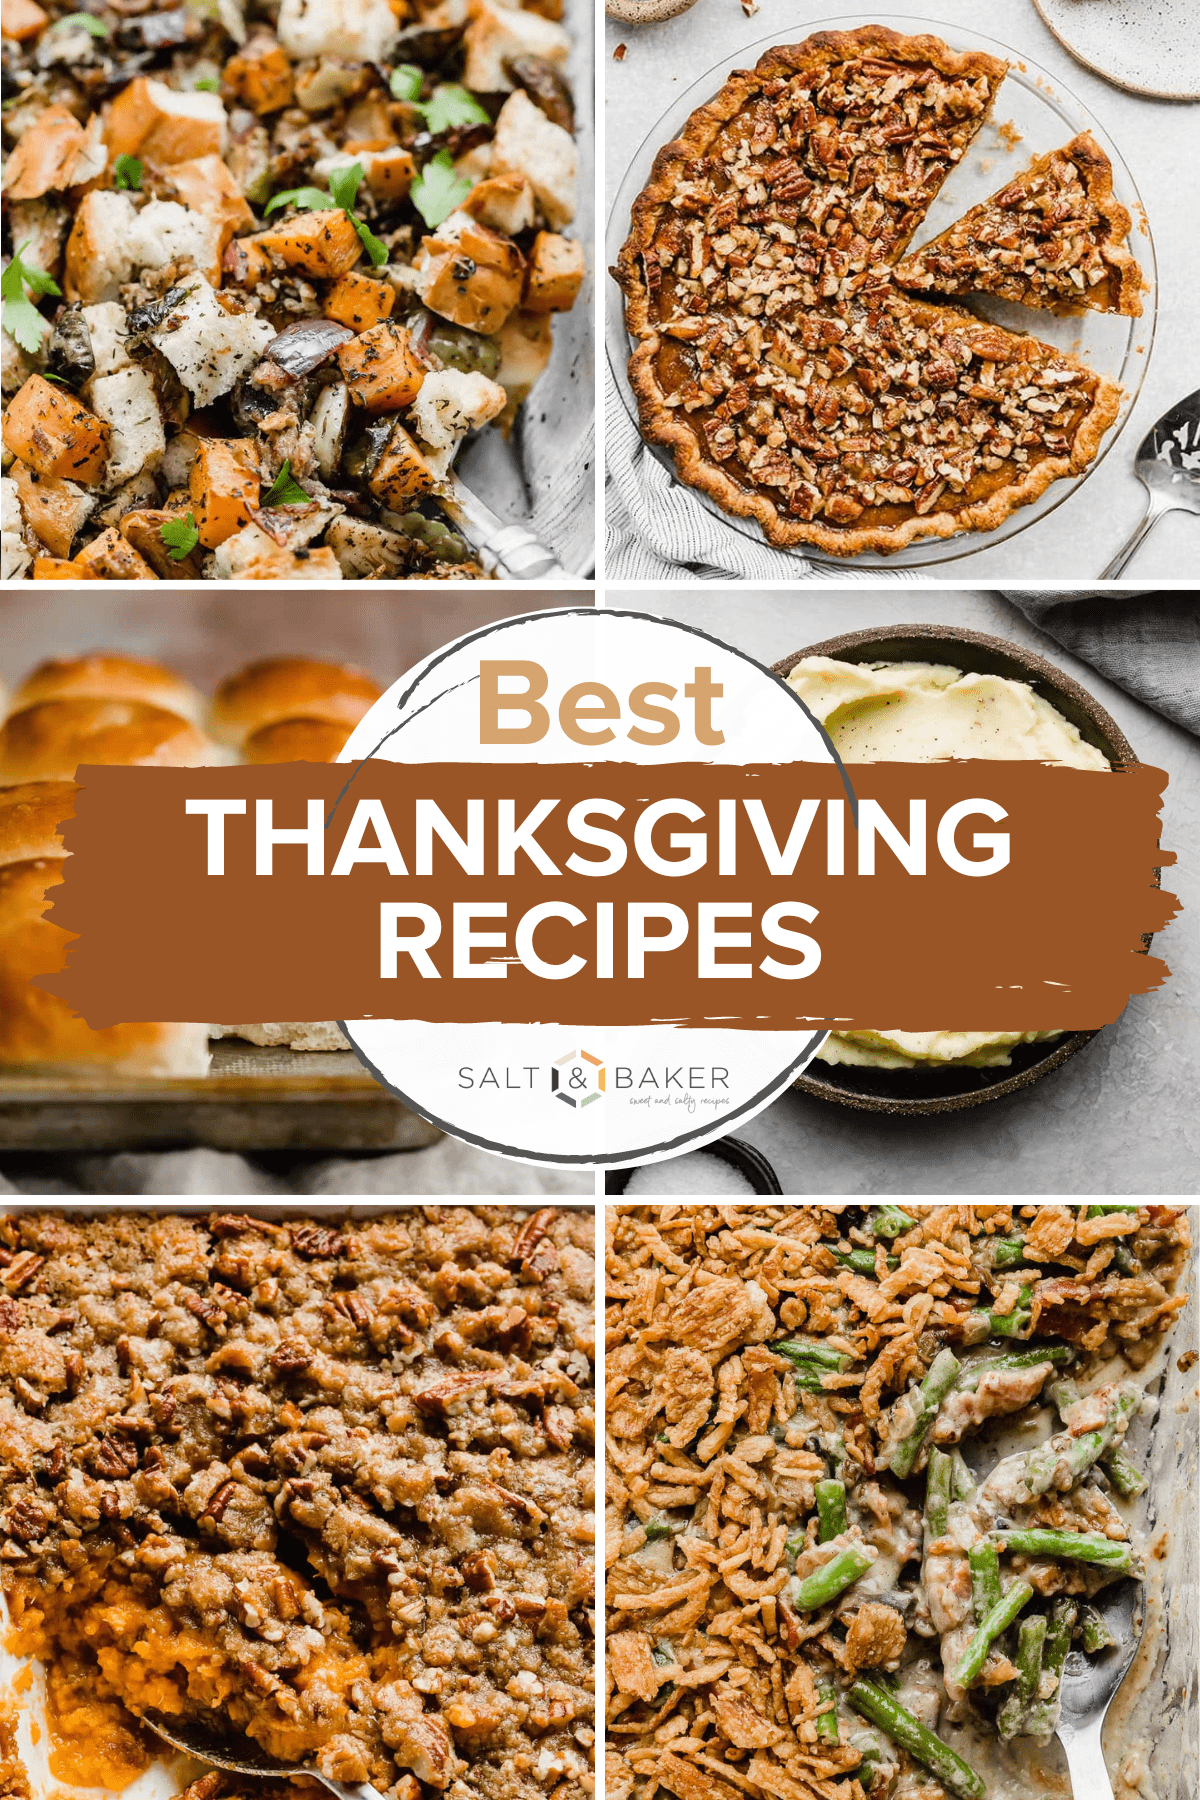 A collage of images featuring the best Thanksgiving recipes! Images include a sausage stuffing recipe, praline pumpkin pie, sweet potato casserole, green bean casserole, mashed potatoes, and homemade dinner rolls!